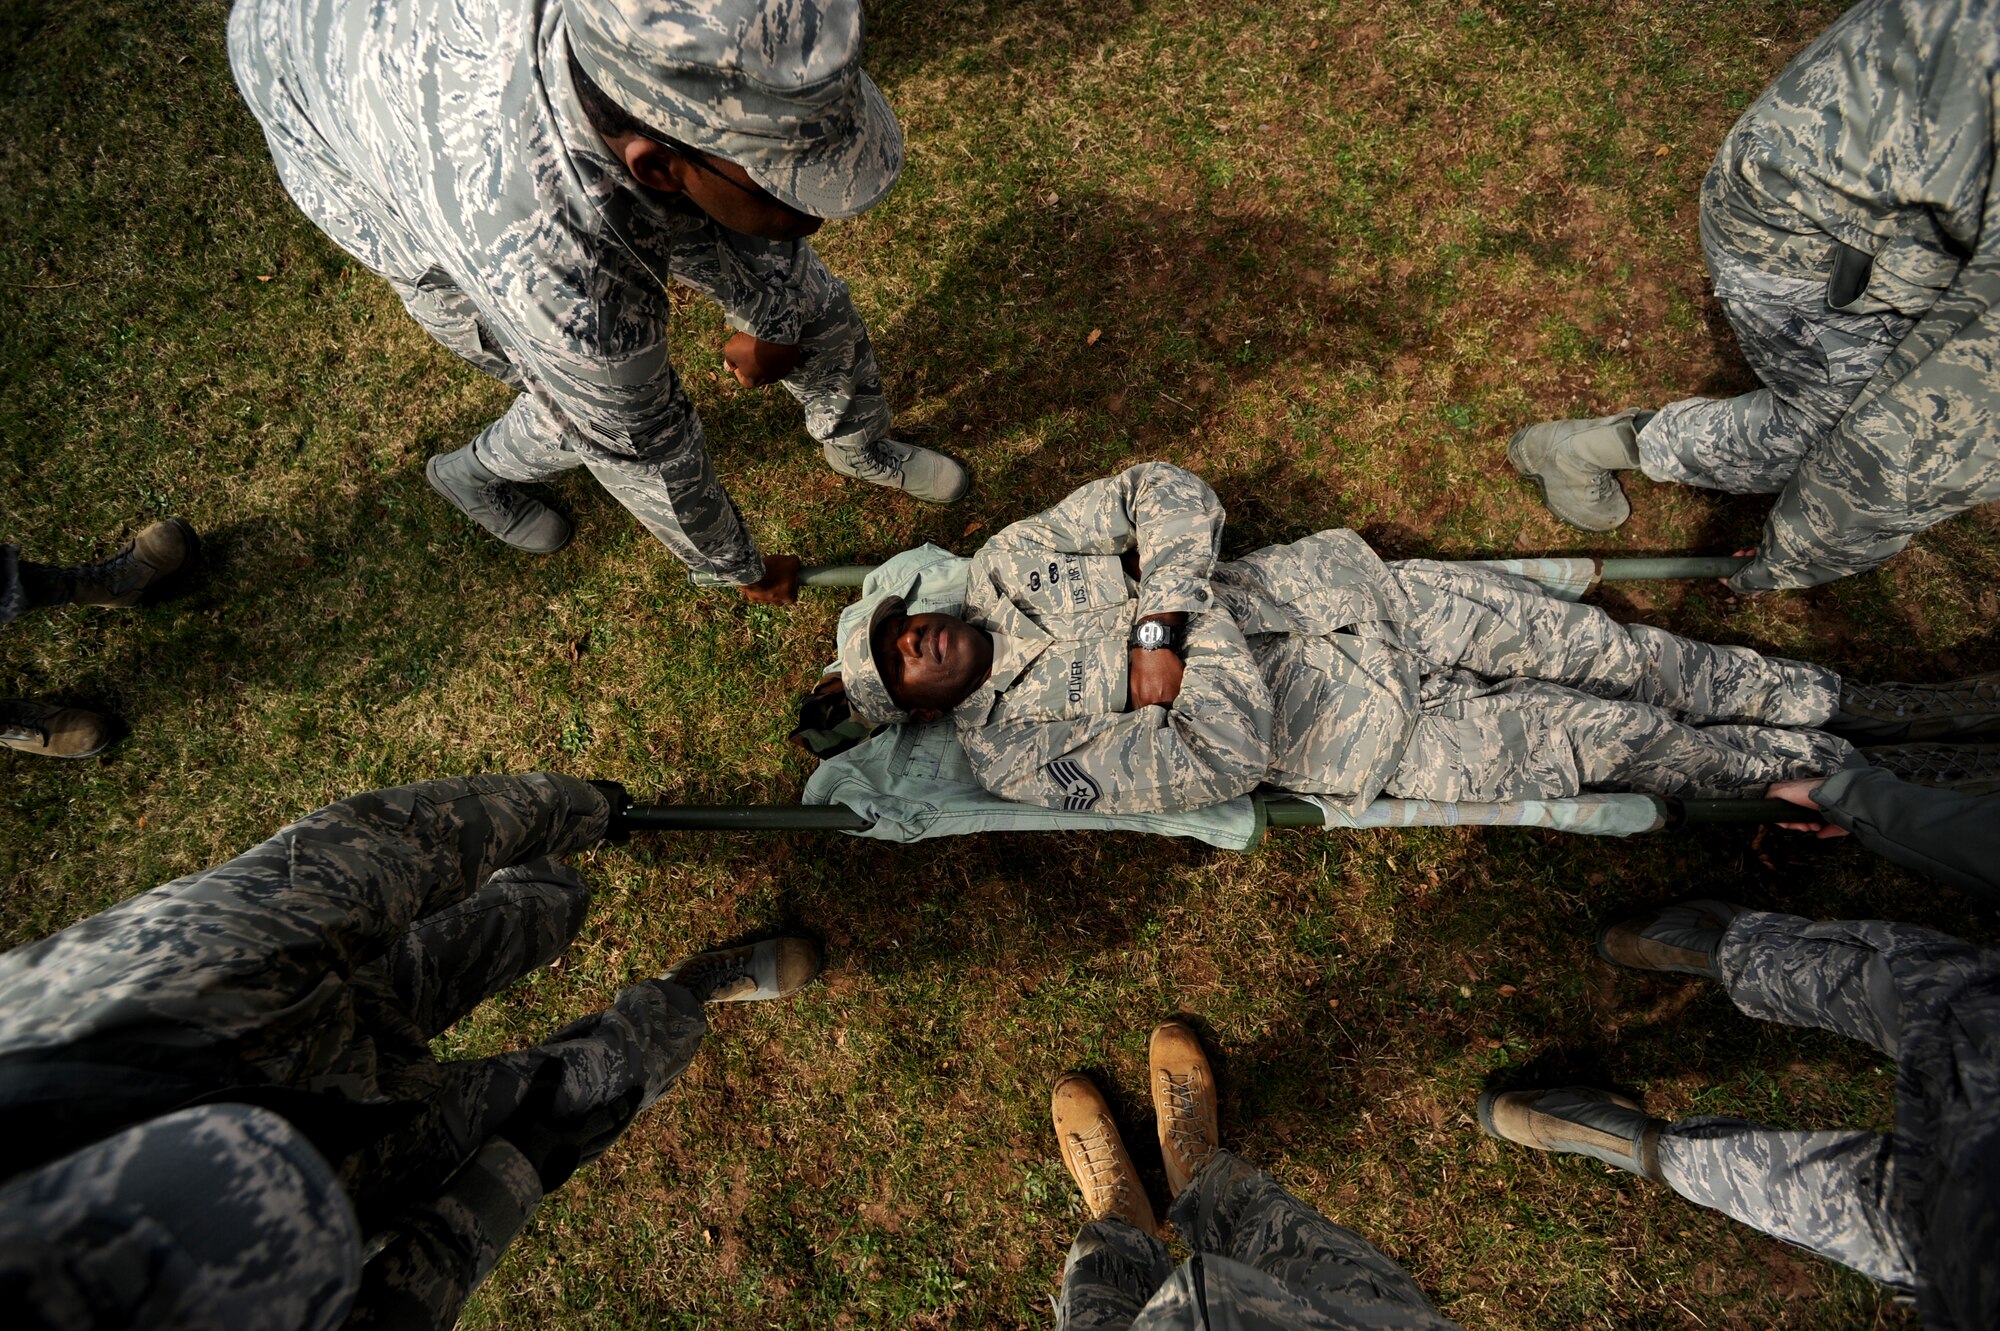 U.S. Air Staff Sgt. Karriem Oliver, 86th Airlift Wing Staff Agency, chaplain's assistant, simulates a wounded member during the improvised litter portion of self aid and buddy care training in support of the upcoming Operations Readiness Inspection (ORI), April 2, 2010, Ramstein Air Base, Germany. Preparation for the ORI allows Air Force members to build on strengths and indentify weaknesses in order to better support future missions. (U.S. Air Force photo by Tech. Sgt. Sarayuth Pinthong)